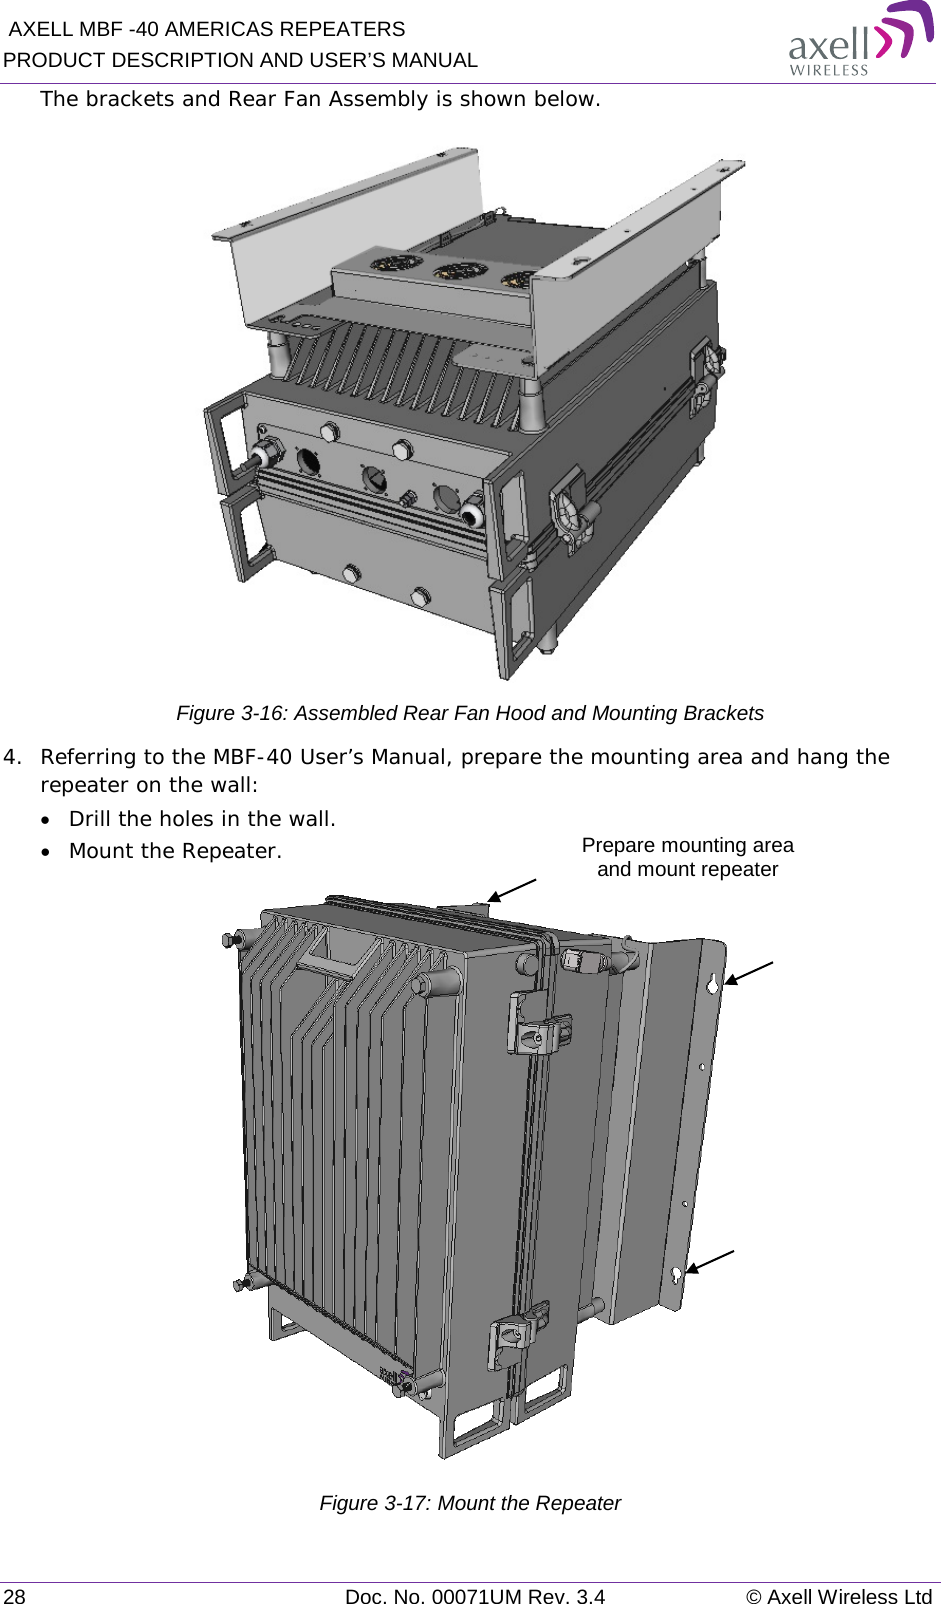  AXELL MBF -40 AMERICAS REPEATERS PRODUCT DESCRIPTION AND USER’S MANUAL 28 Doc. No. 00071UM Rev. 3.4 © Axell Wireless Ltd The brackets and Rear Fan Assembly is shown below.  Figure  3-16: Assembled Rear Fan Hood and Mounting Brackets 4.  Referring to the MBF-40 User’s Manual, prepare the mounting area and hang the repeater on the wall:  • Drill the holes in the wall. • Mount the Repeater.  Figure  3-17: Mount the Repeater Prepare mounting area  and mount repeater 